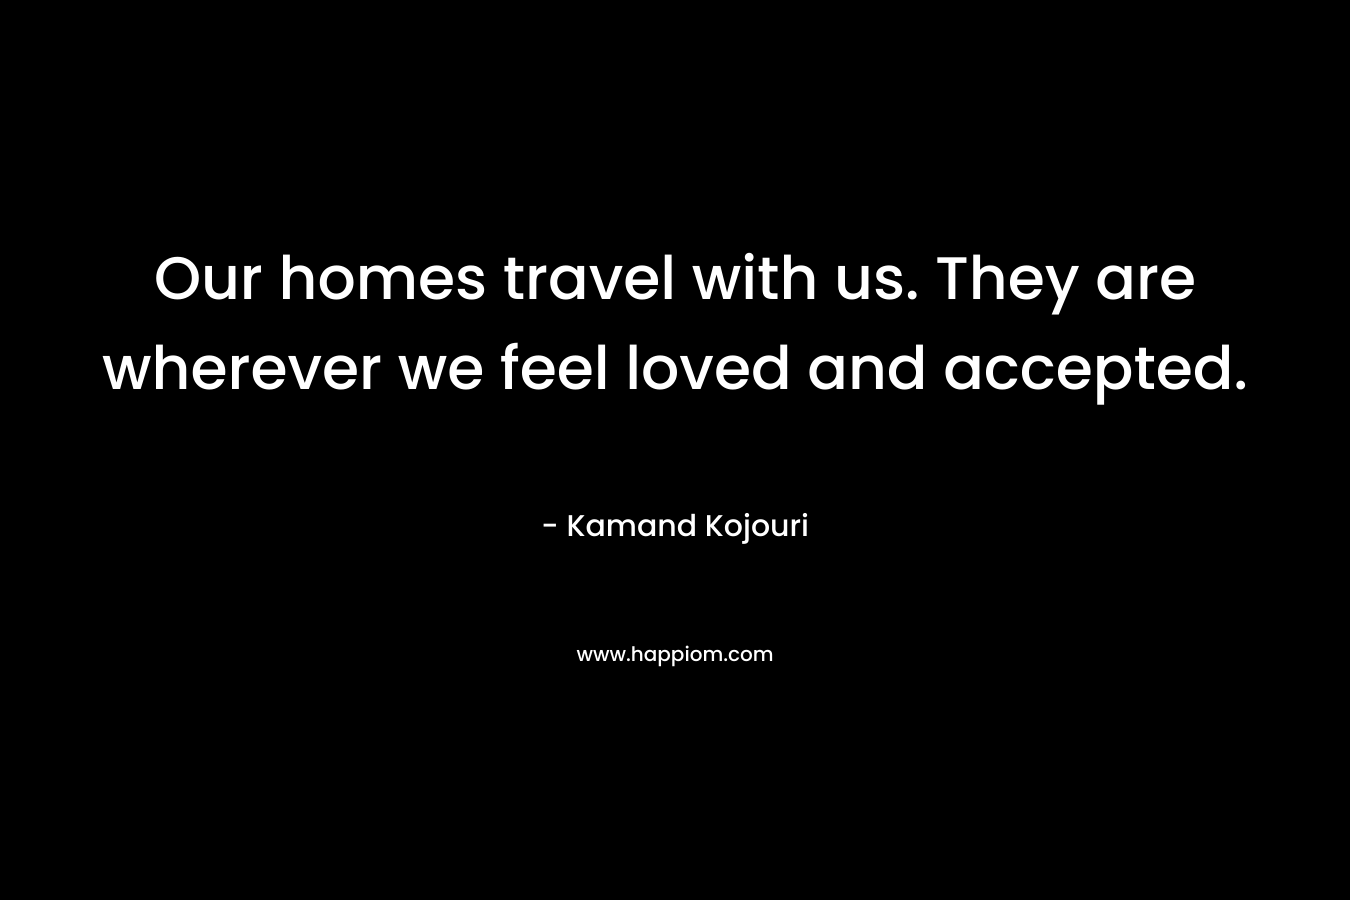 Our homes travel with us. They are wherever we feel loved and accepted.